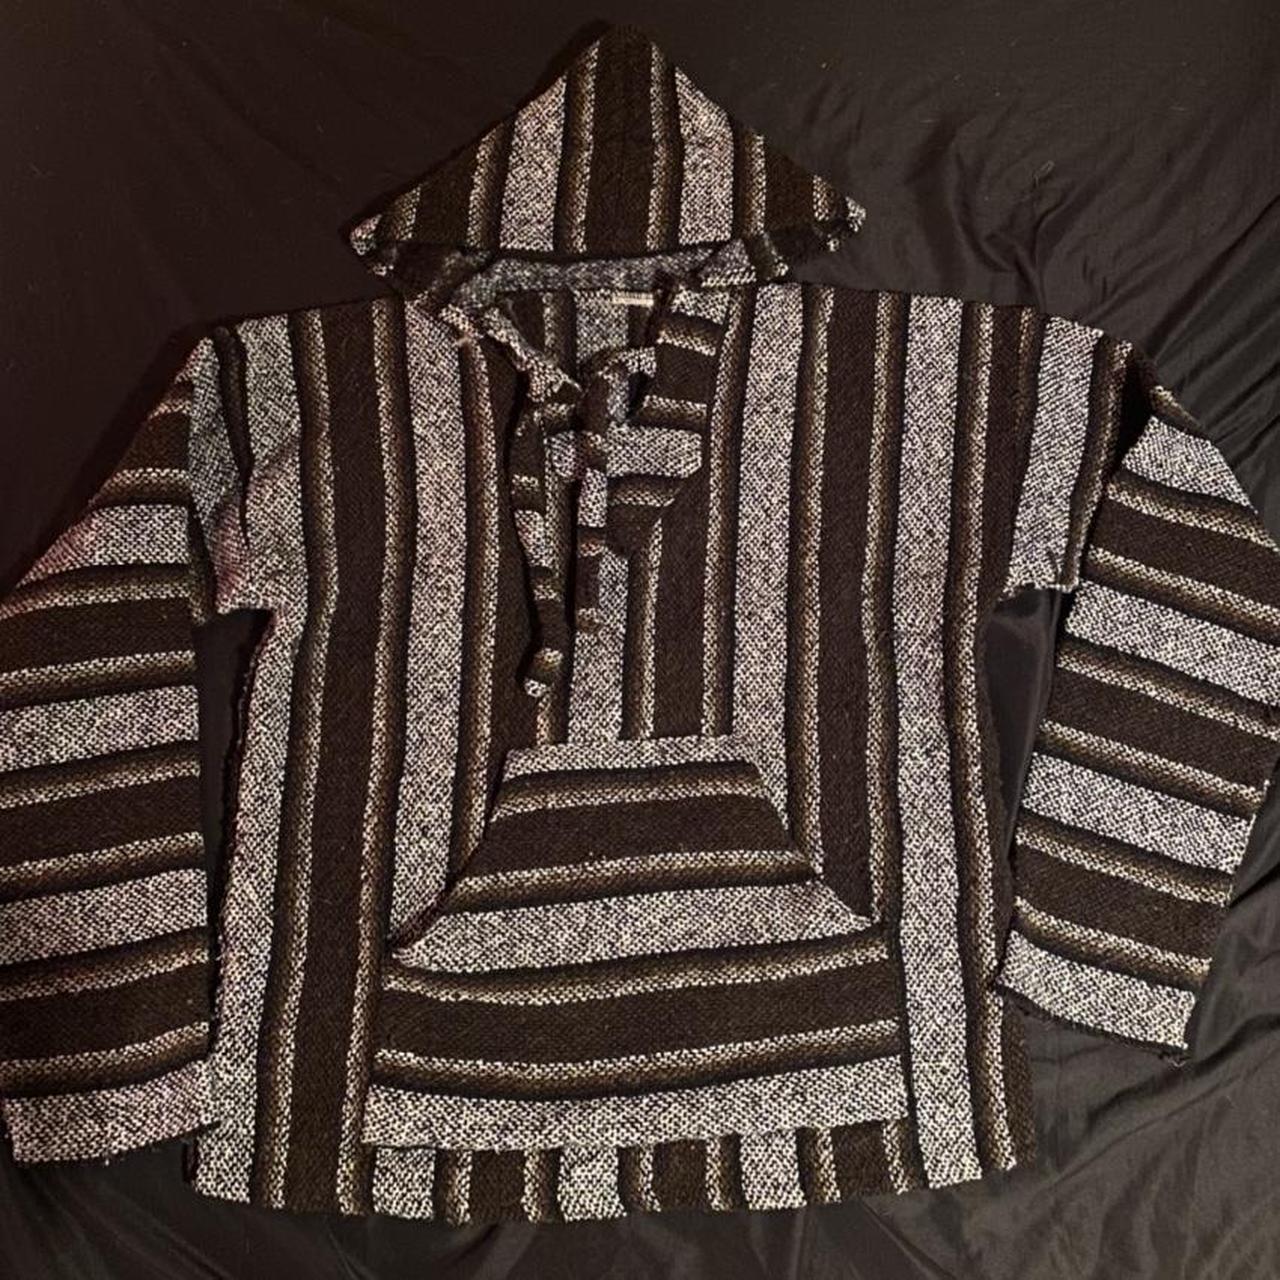 Product Image 1 - Handmade drugrug/poncho 
•N/S but fits